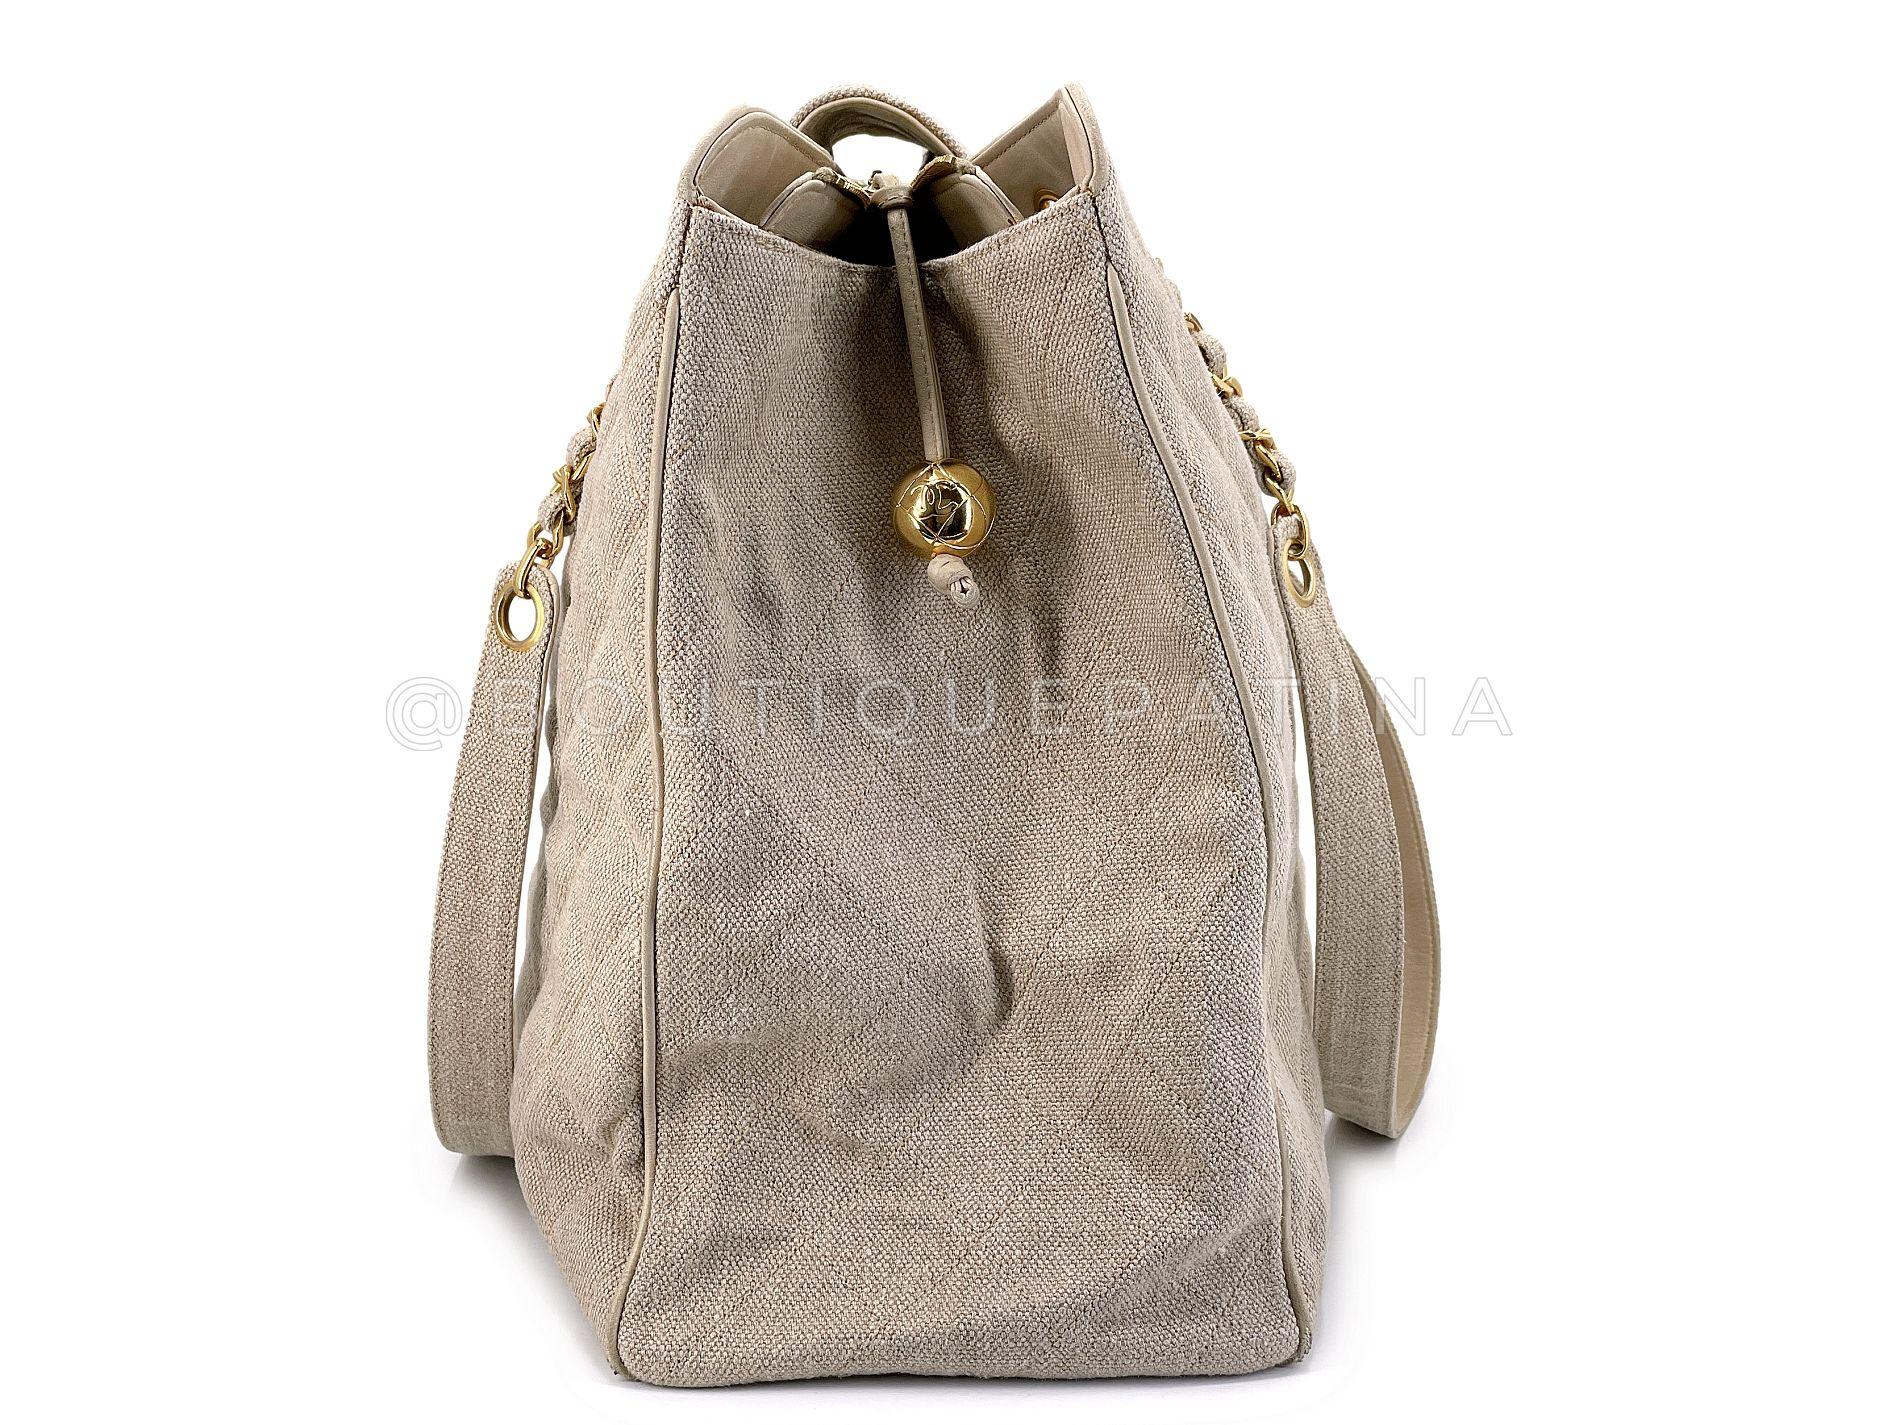 Chanel Vintage Supermodel Taupe Beige Linen XL Weekender Tote Bag 24k GHW 68015 In Excellent Condition For Sale In Costa Mesa, CA